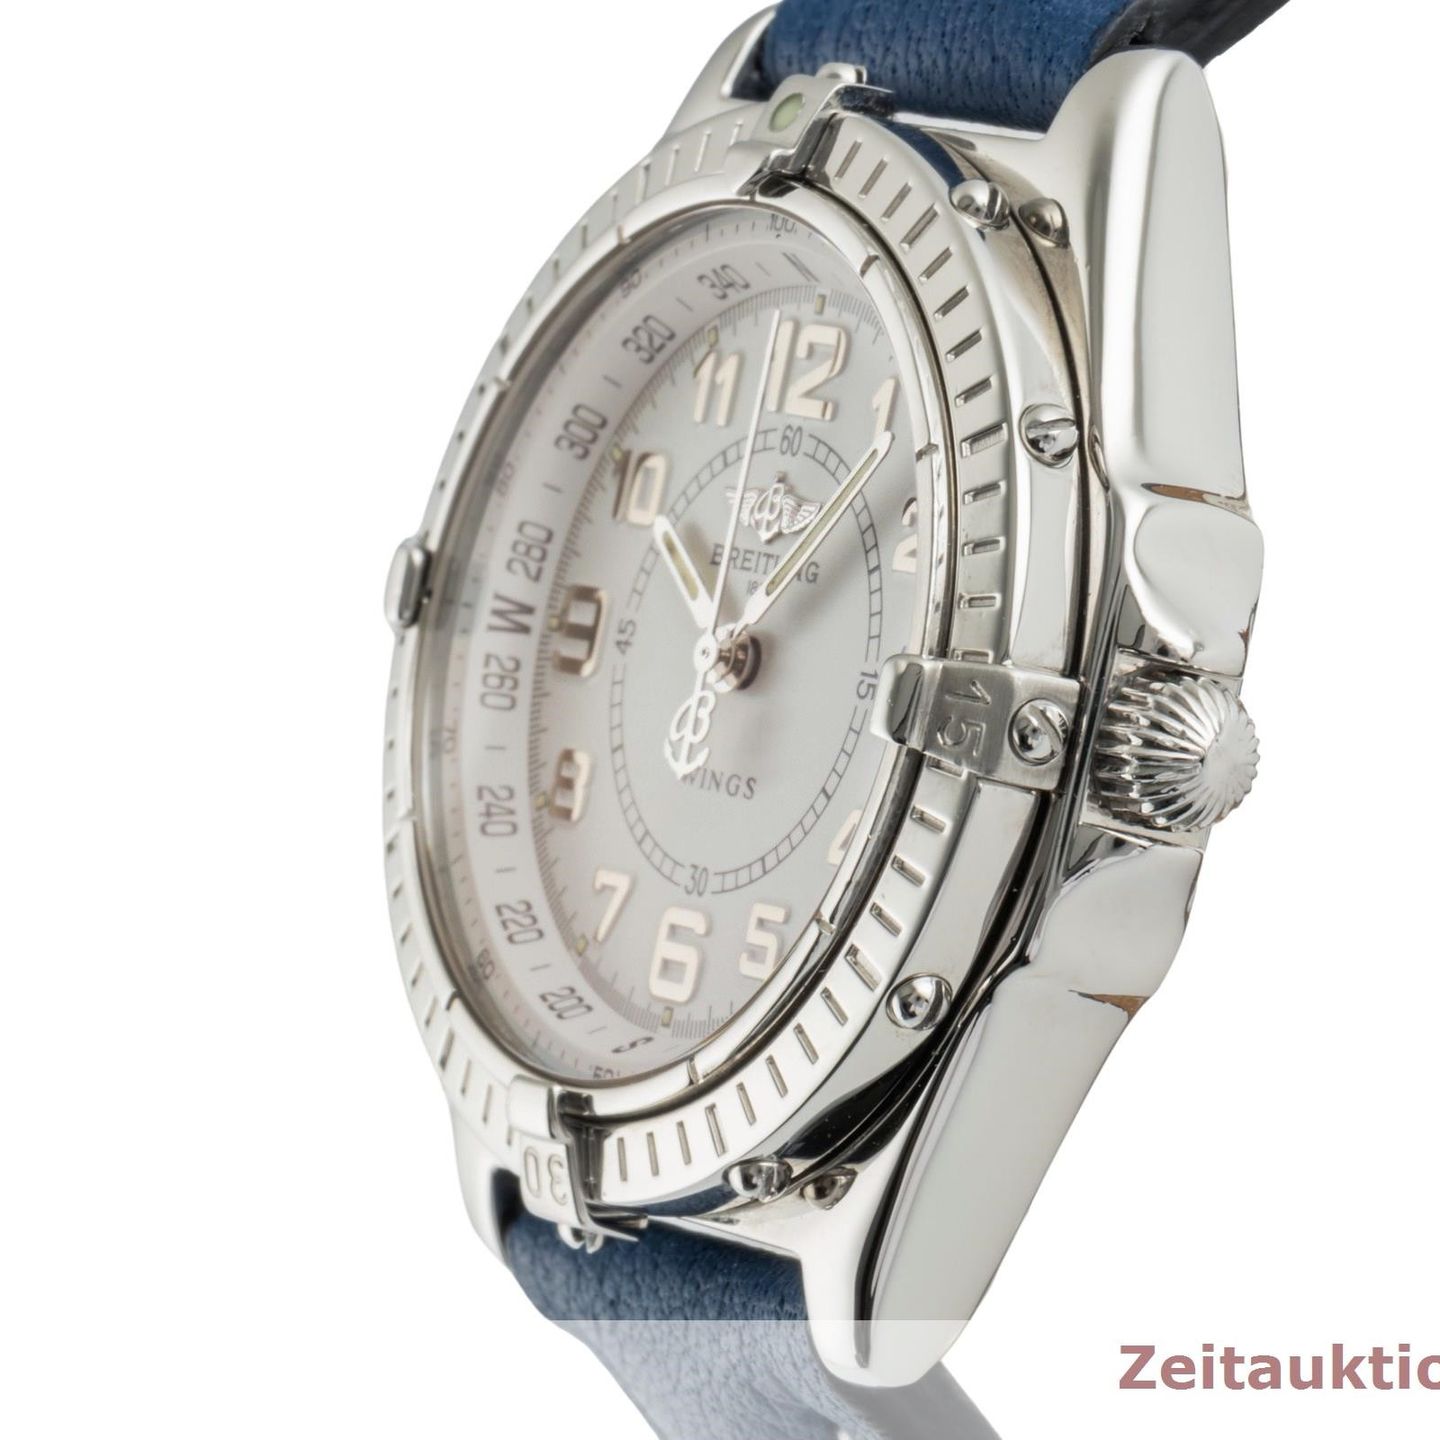 Breitling Wings Lady A66050 (1998) - Wit wijzerplaat 36mm Staal (6/8)